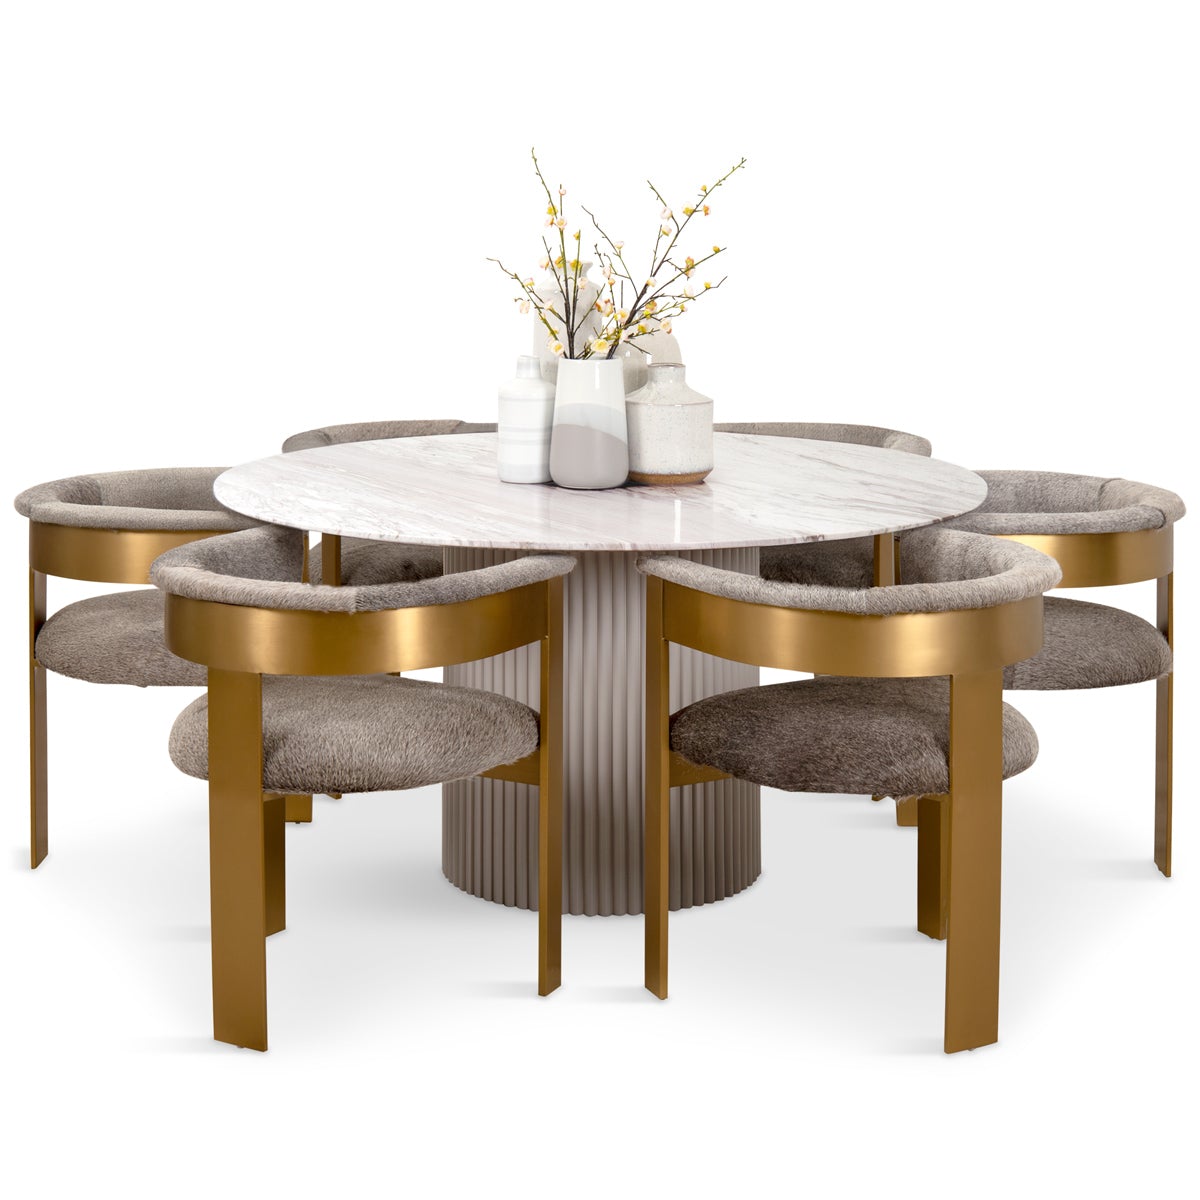 Ubud Round Dining Table with Italian Grey Marble Top